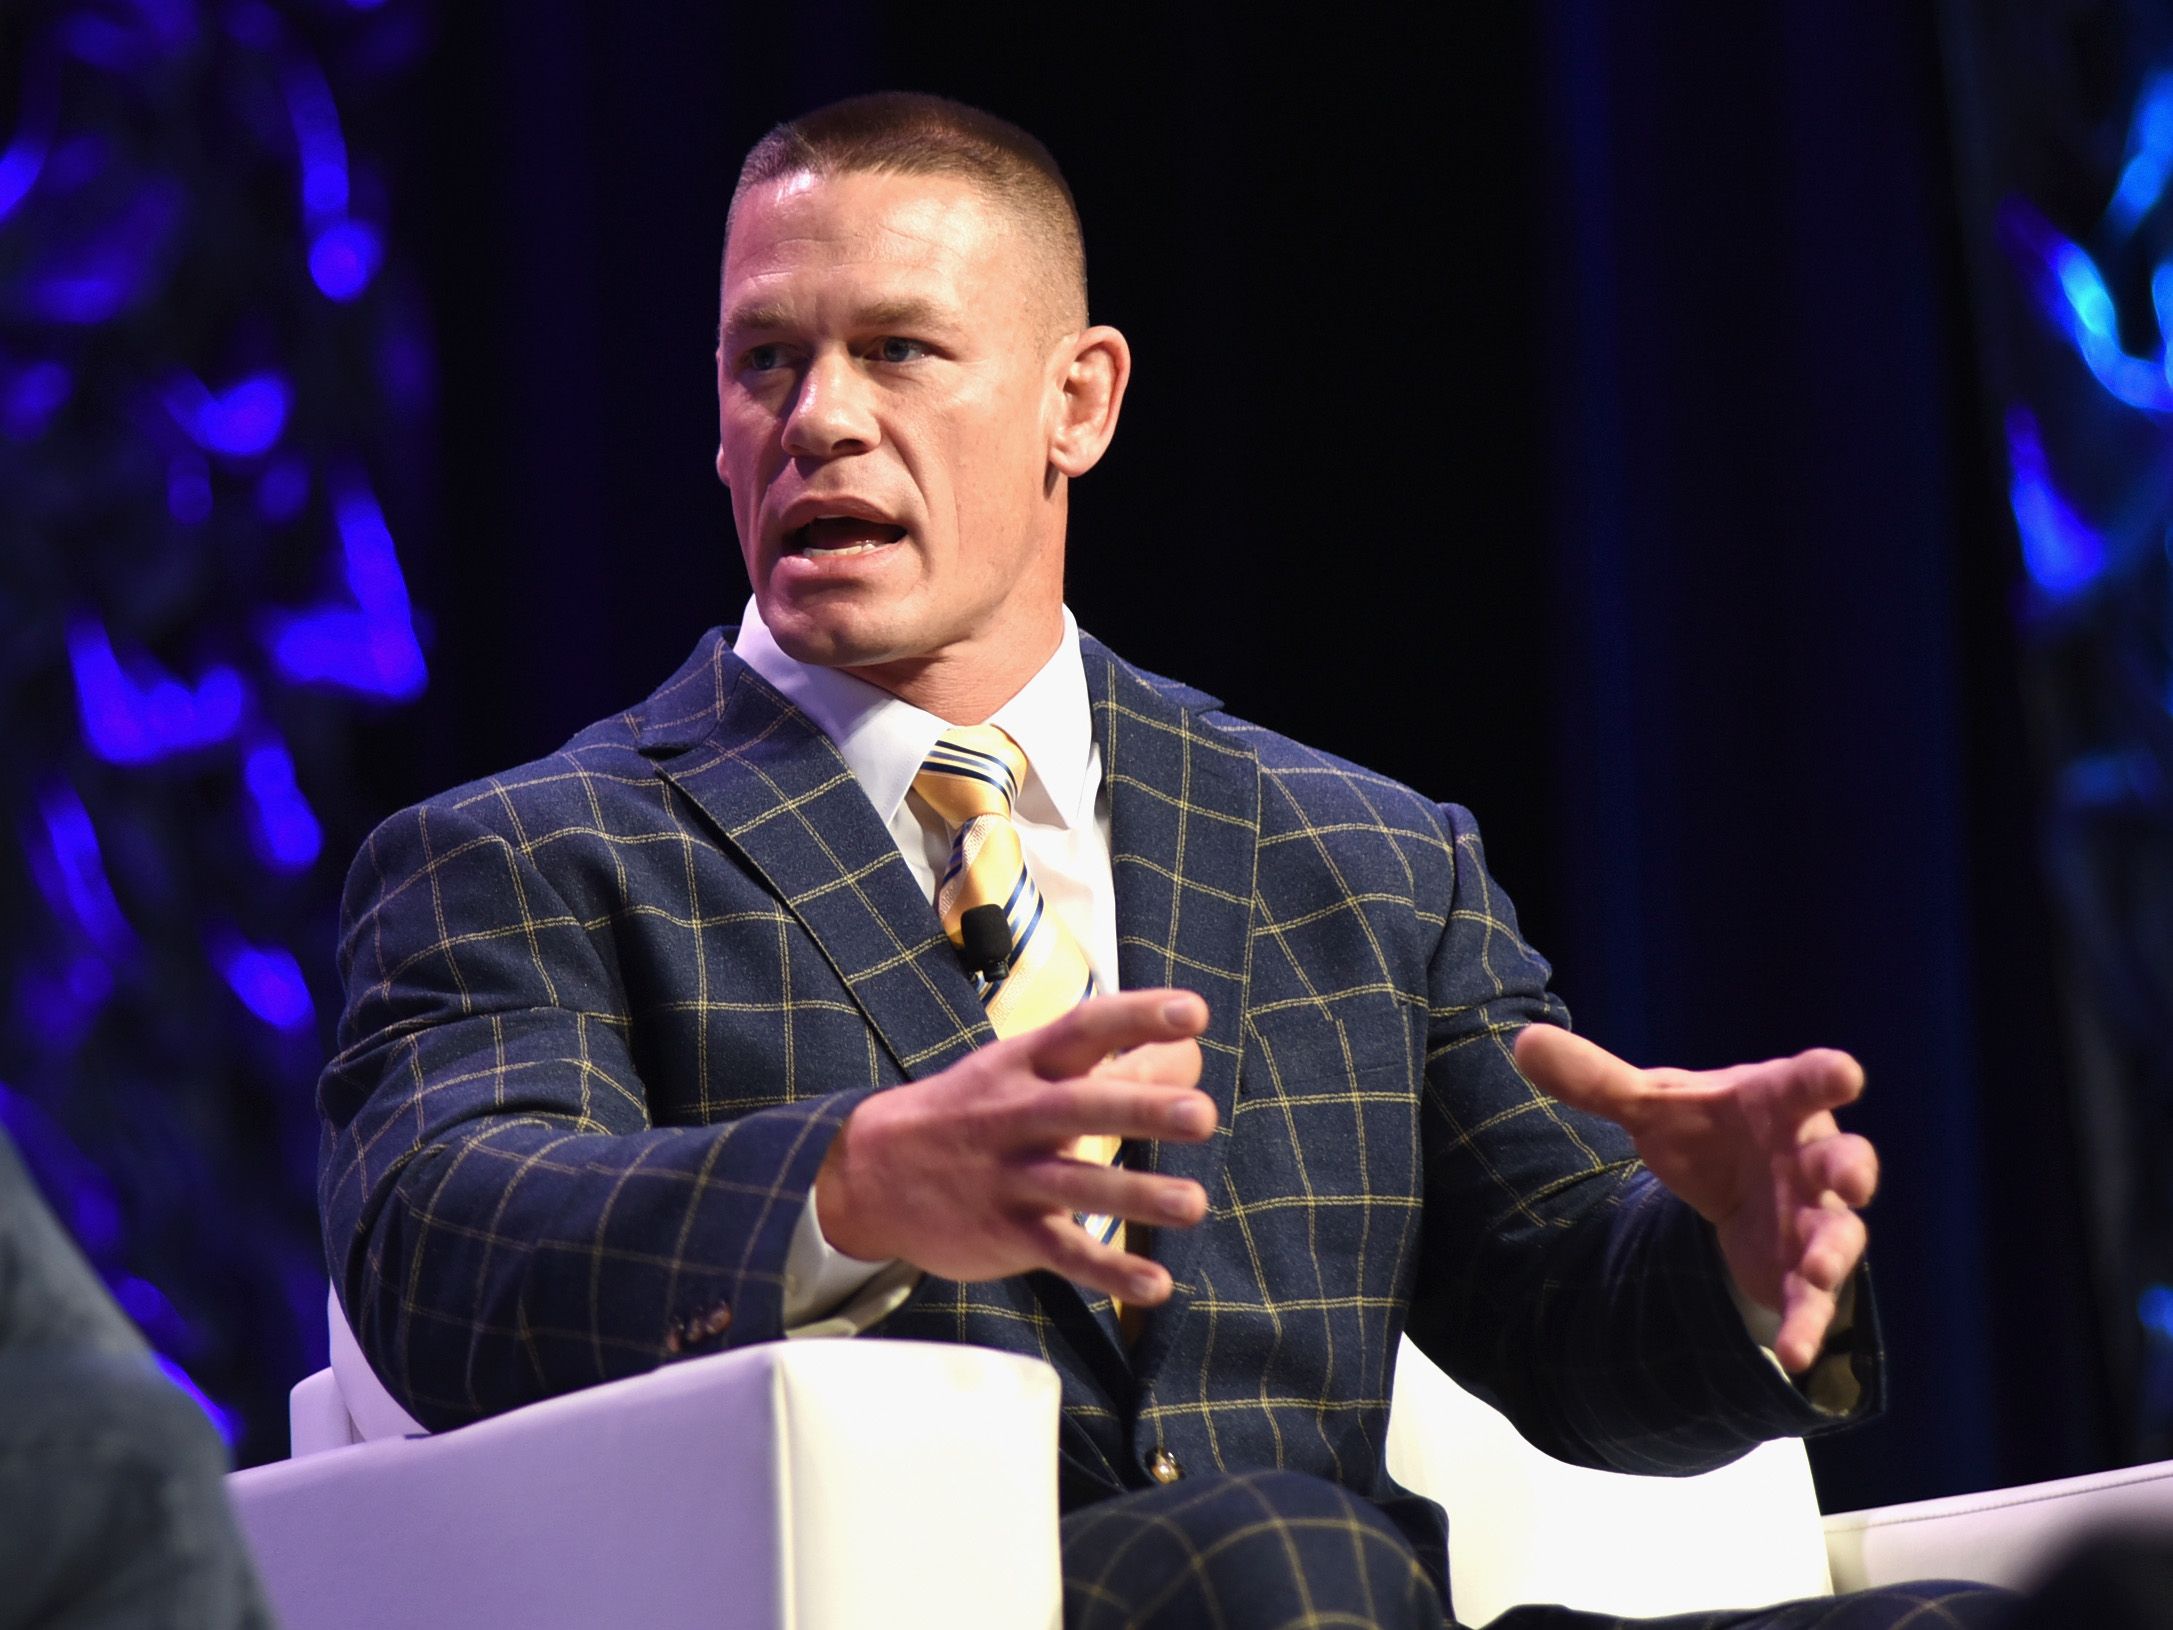 John Cena during the "Featured Speaker: John Cena" 2017 SXSW Conference and Festivals at Austin Convention Center on March 13, 2017, in Austin, Texas. | Source: Getty Images